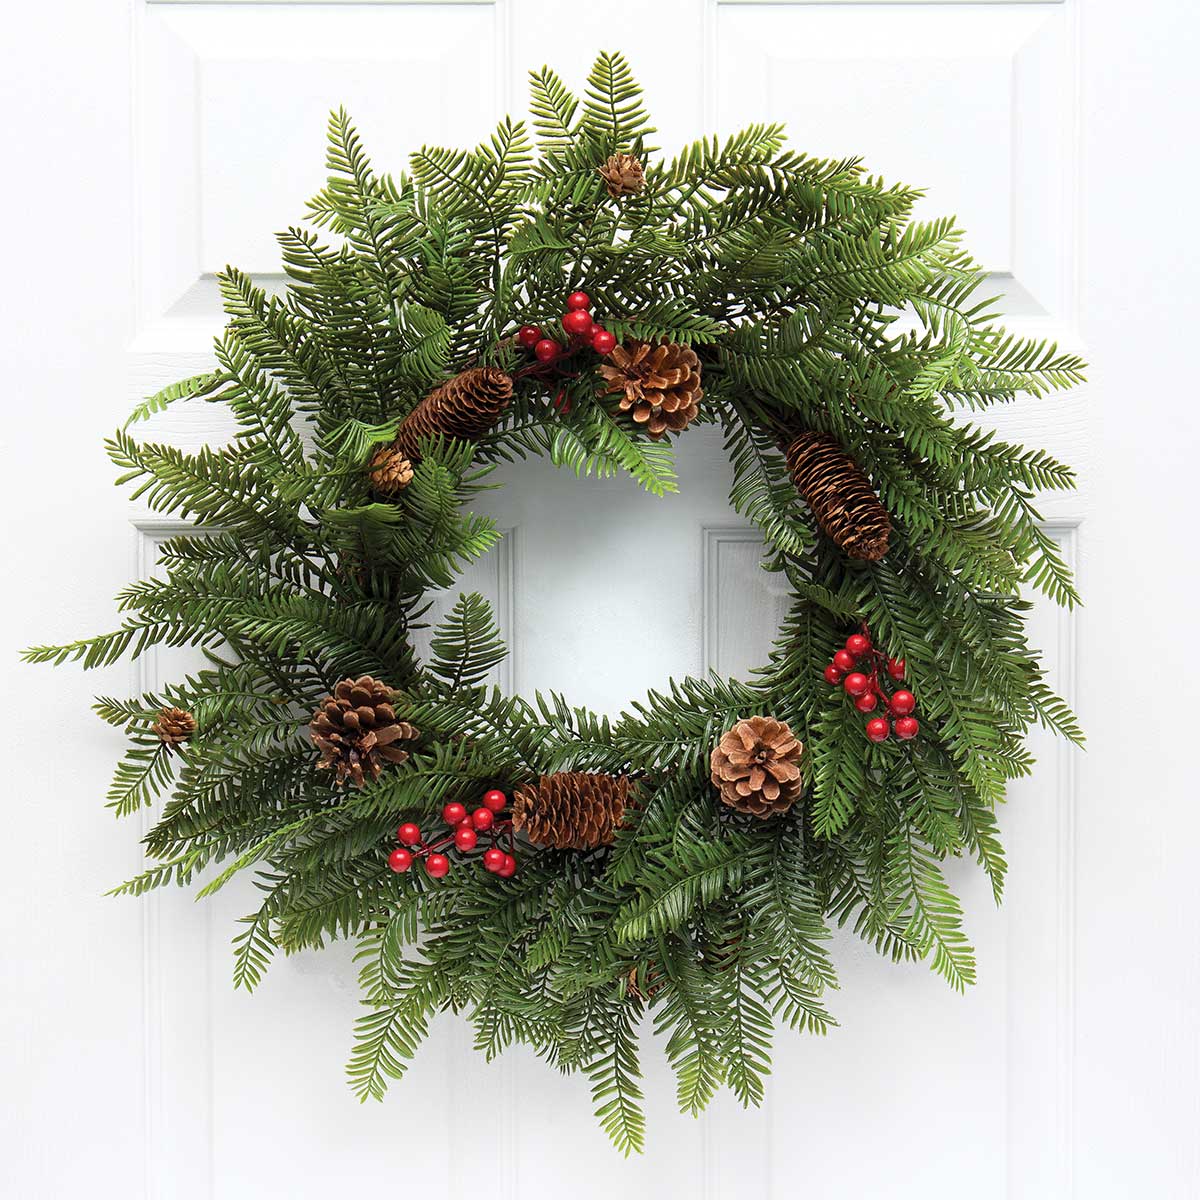 !WILLIAMSBURG PINE WREATH WITH RED BERRIES, PINECONES